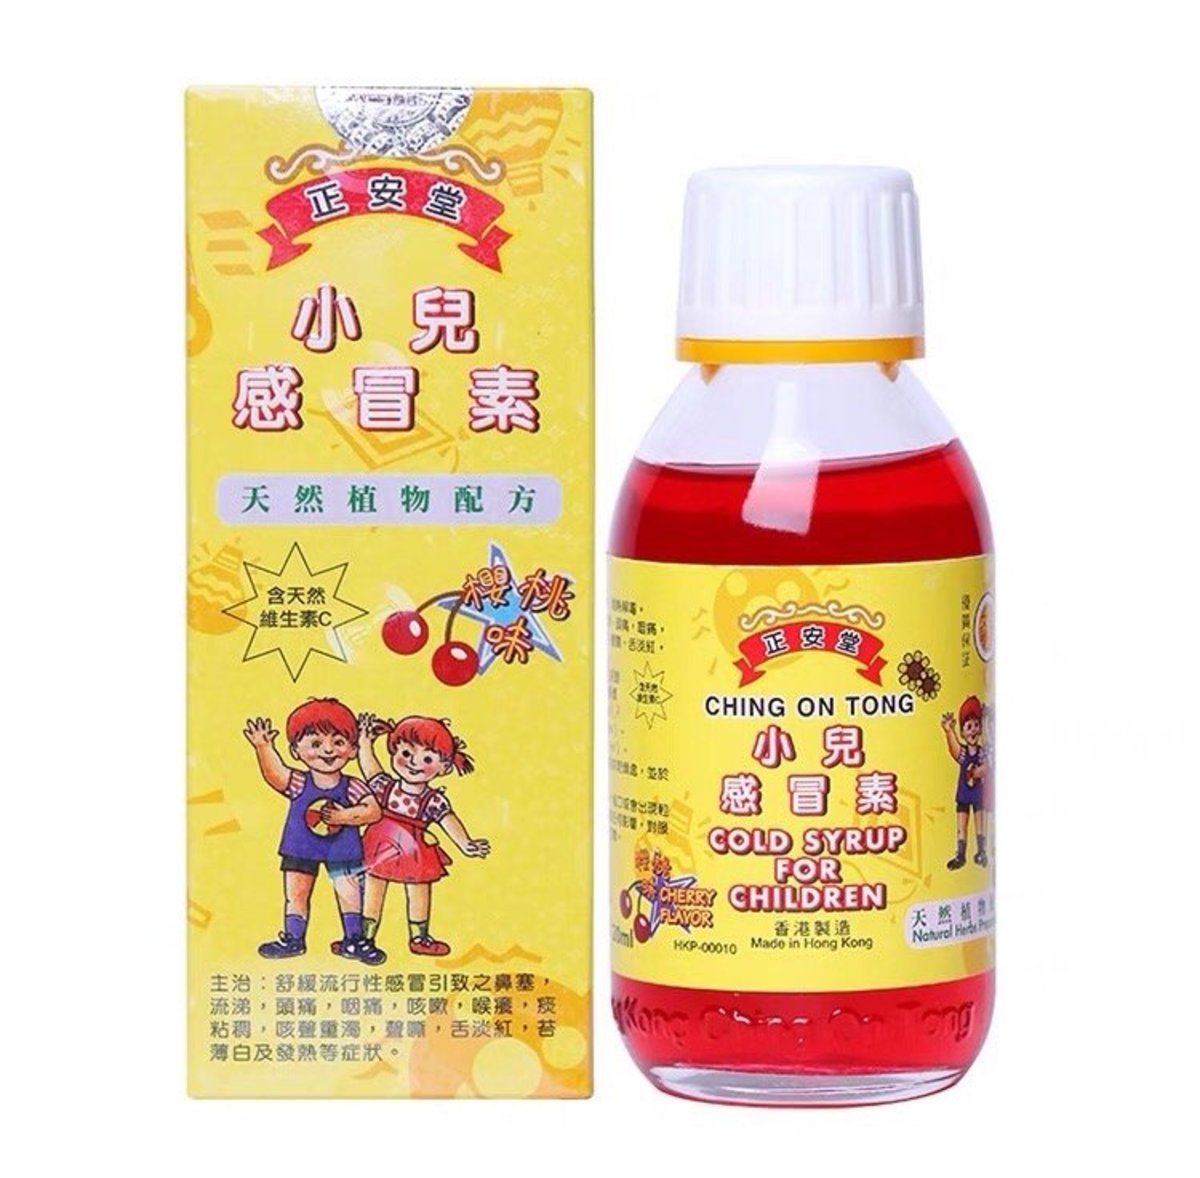 COLD SYRUP FOR CHILDREN - CHERRY FLAVOR (120ml)